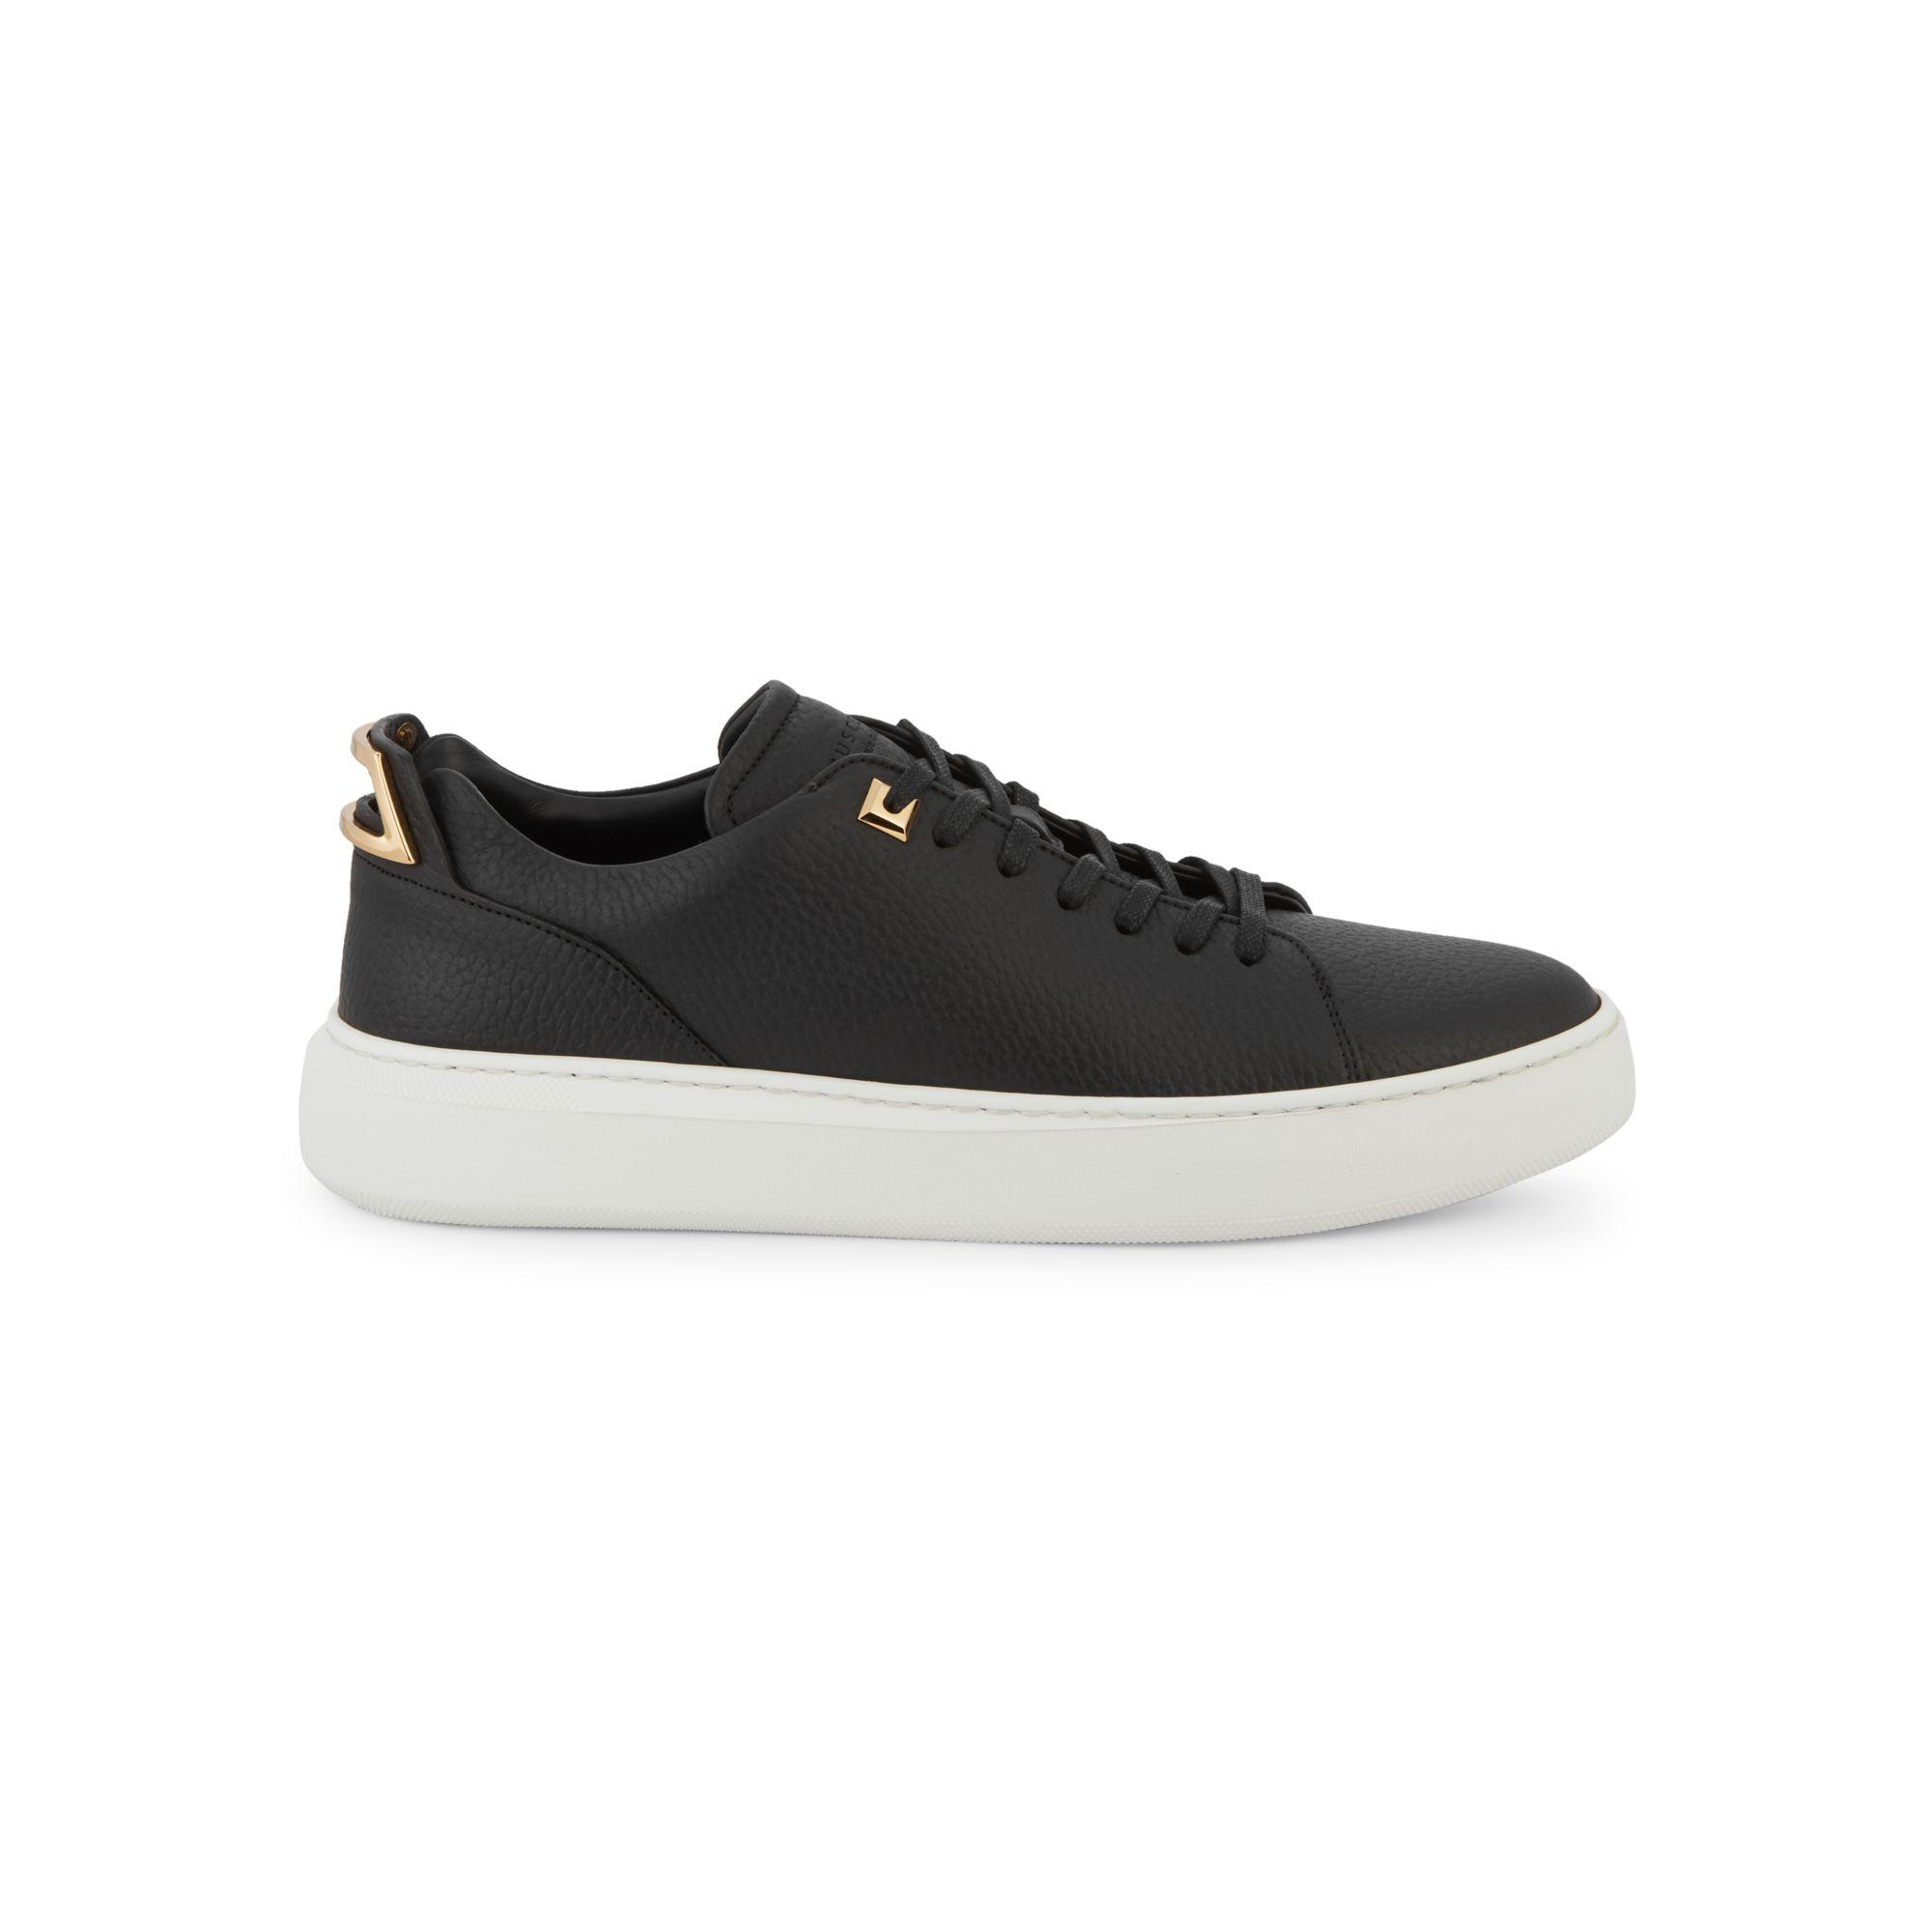 Buscemi Uno Low-top Leather Sneakers in Black for Men - Lyst